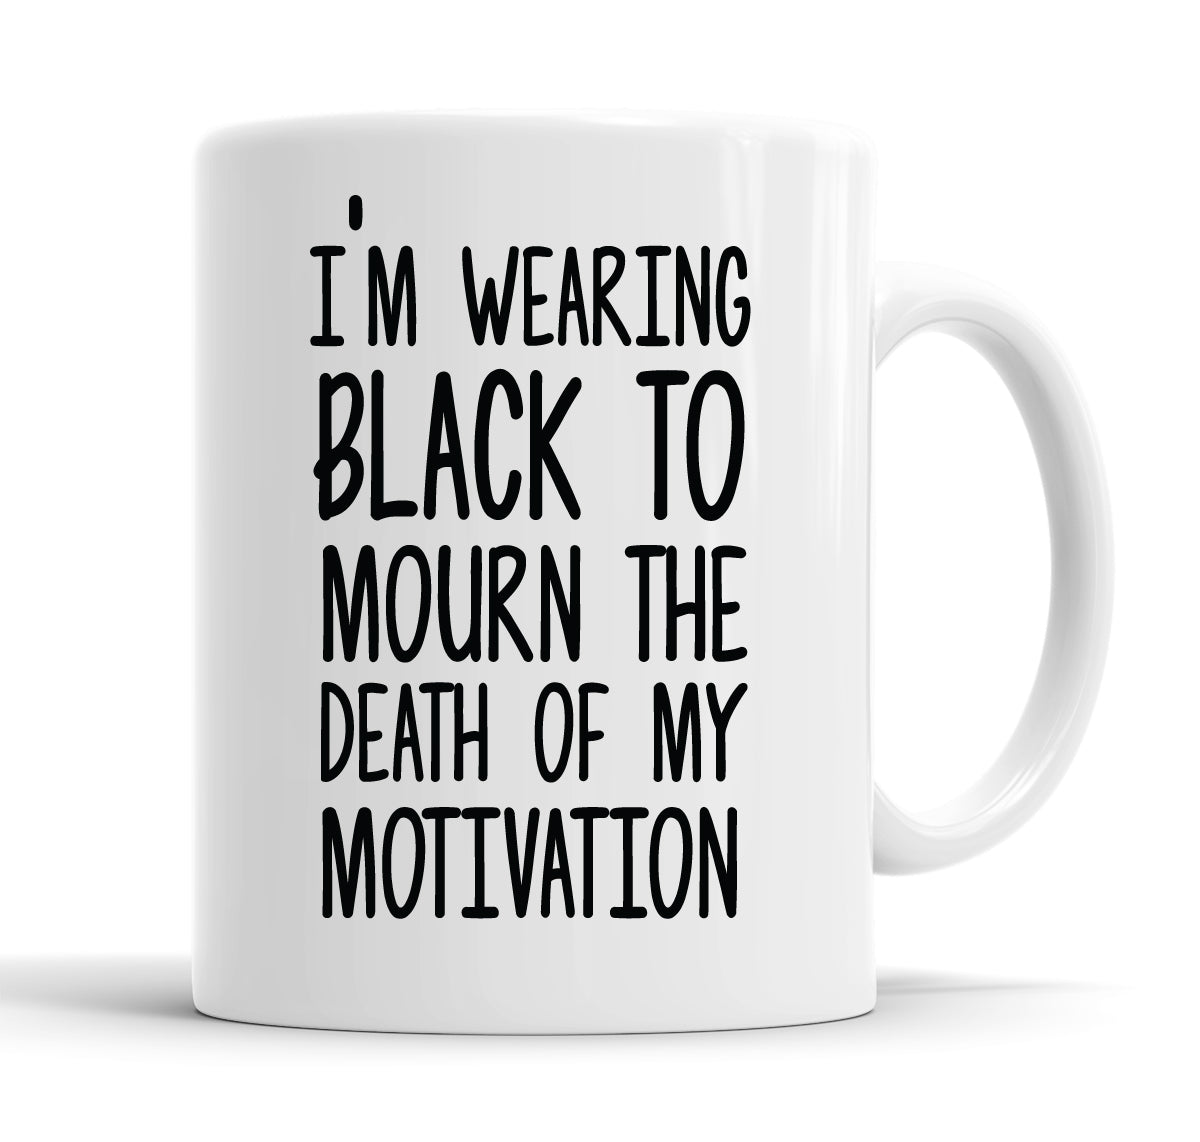 I'm Wearing Black To Mourn The Death Of My Motivation Funny Slogan Mug Tea Cup Coffee